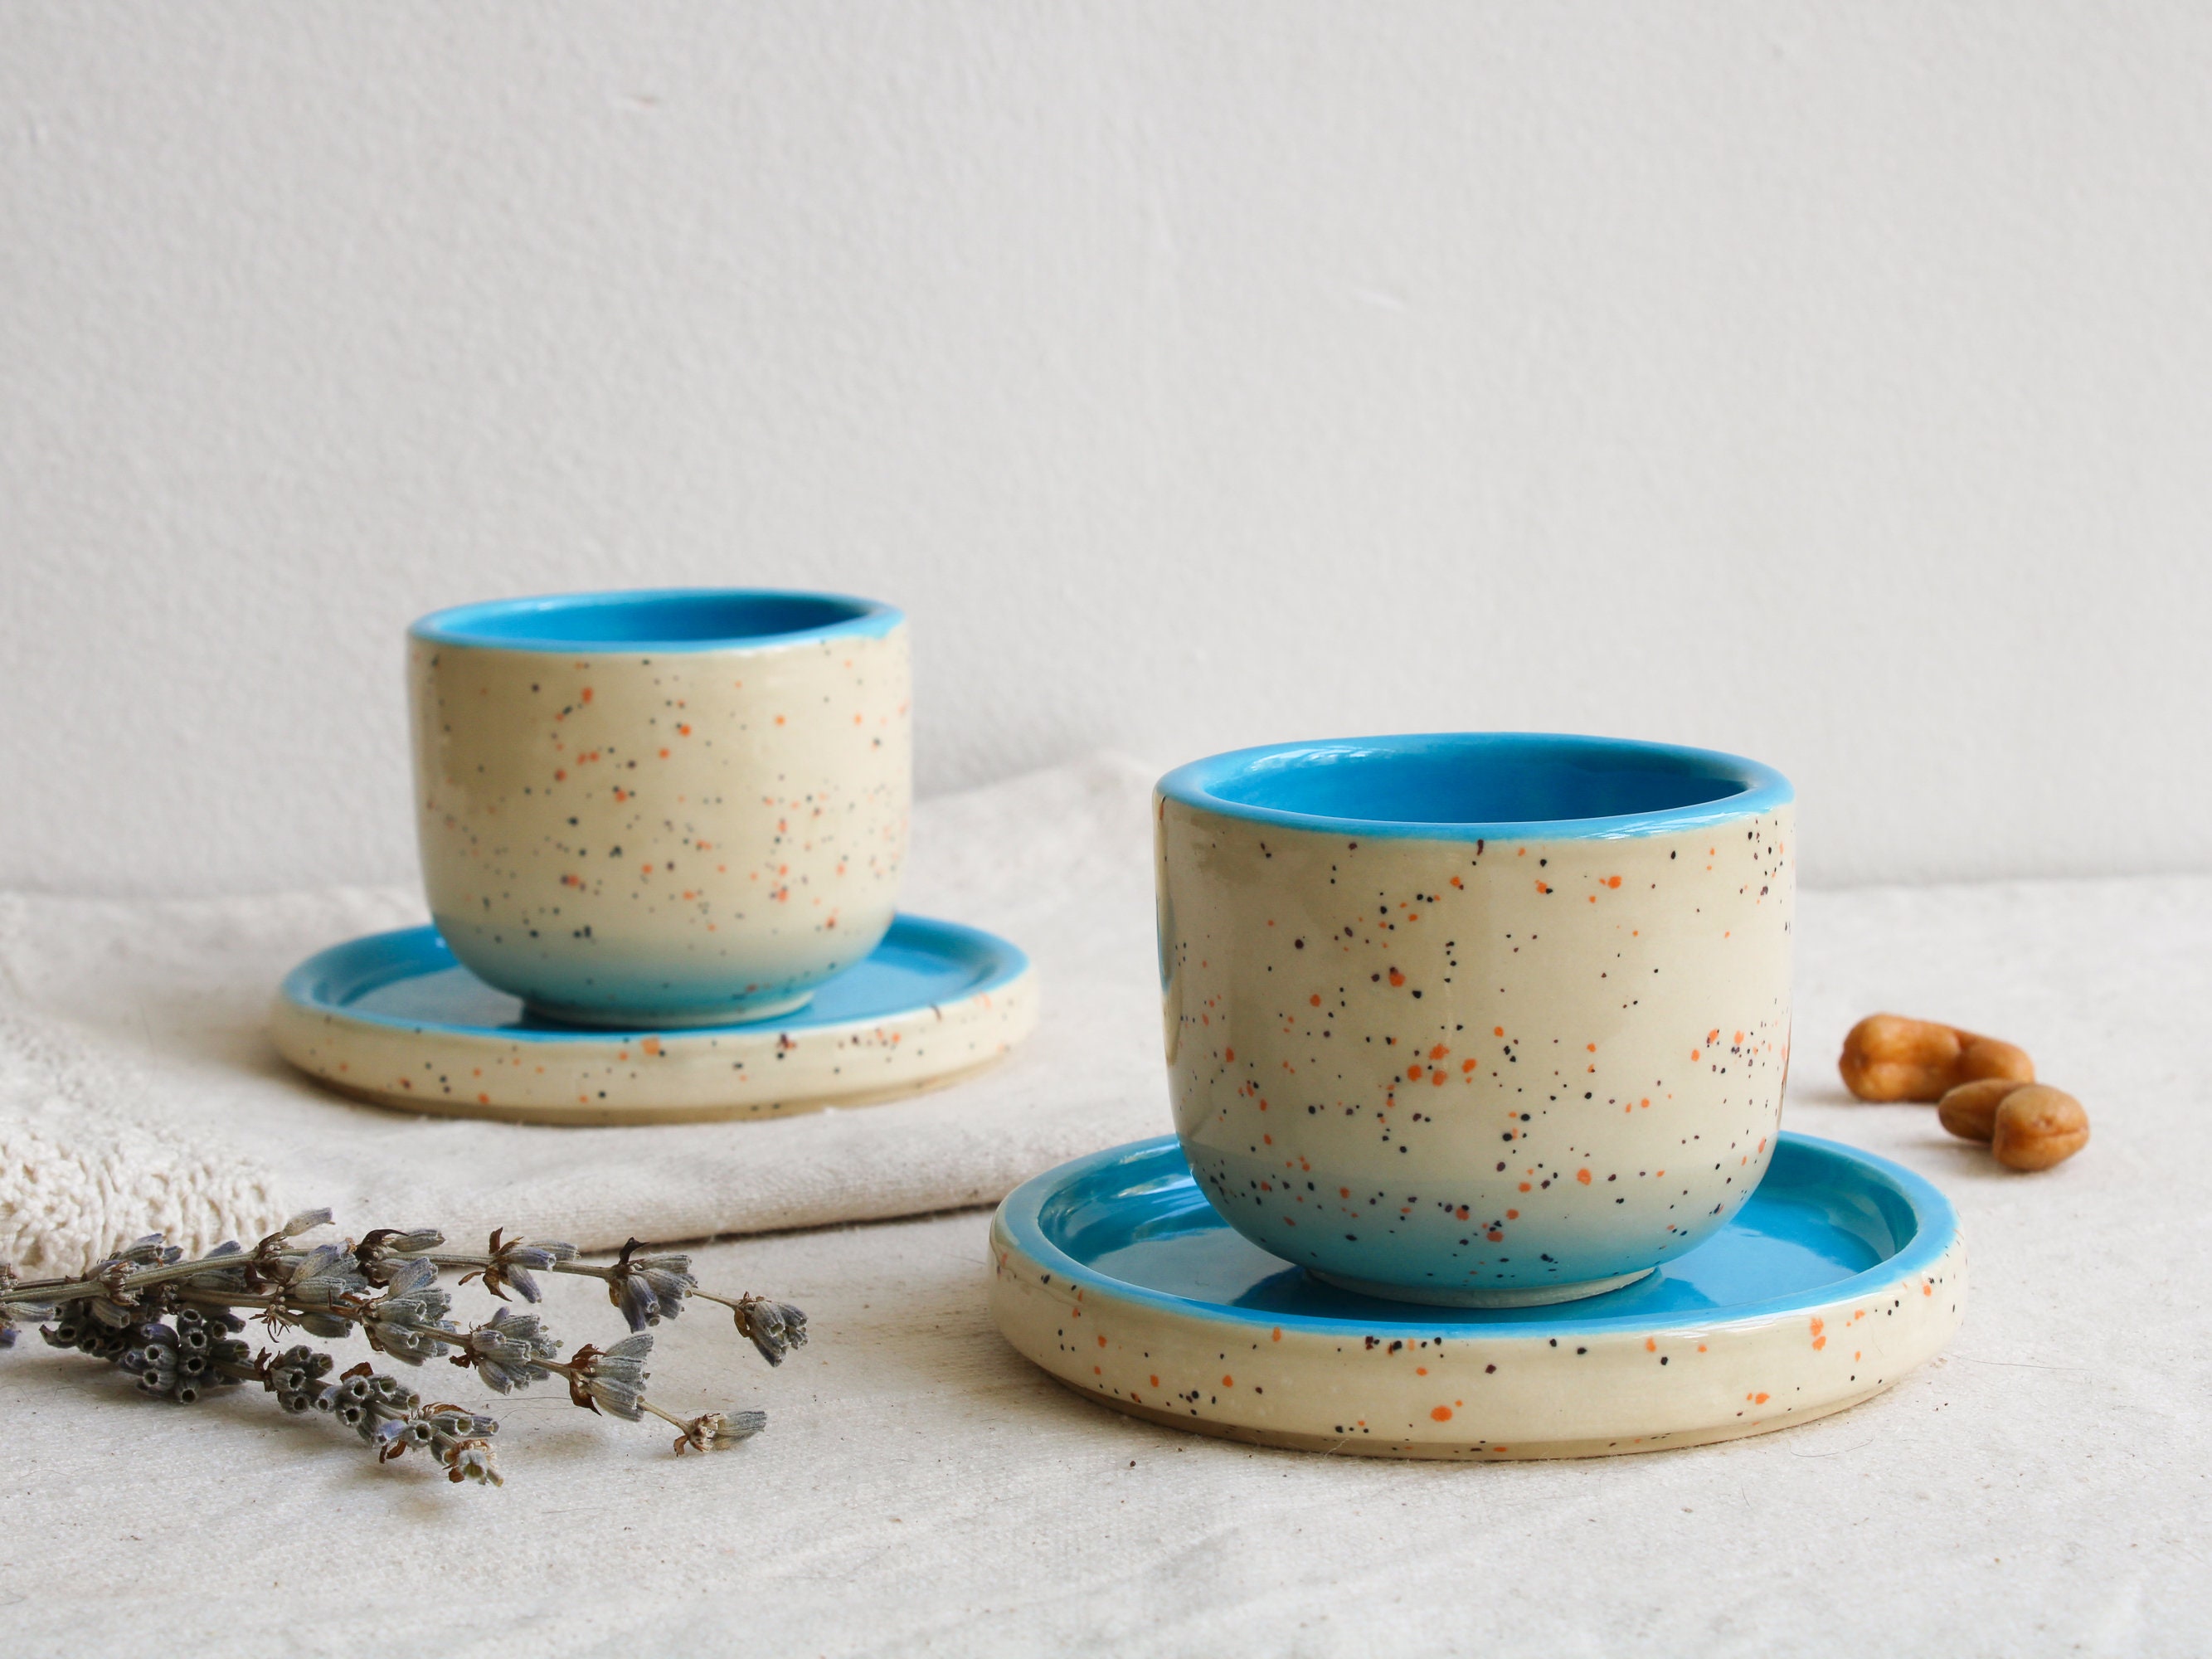 Blue Dragonfly Delight: Handmade Ceramic Espresso Cup Set with